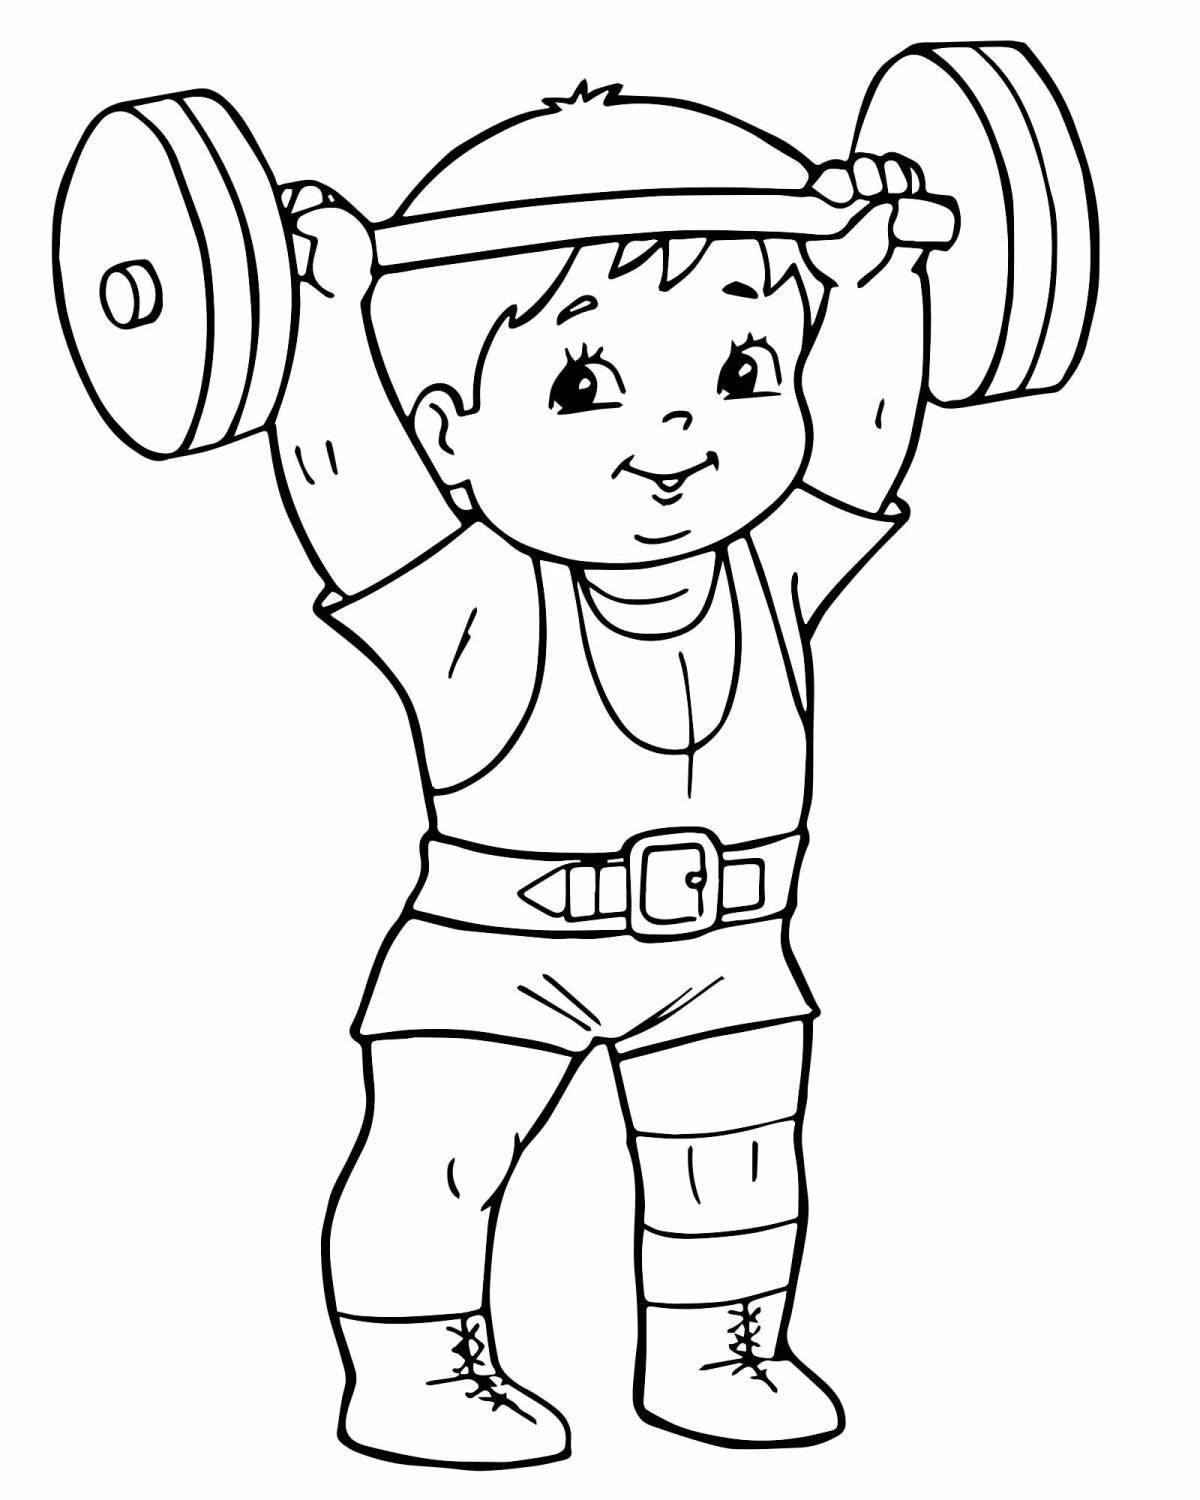 Animated sportsmen coloring pages for kids